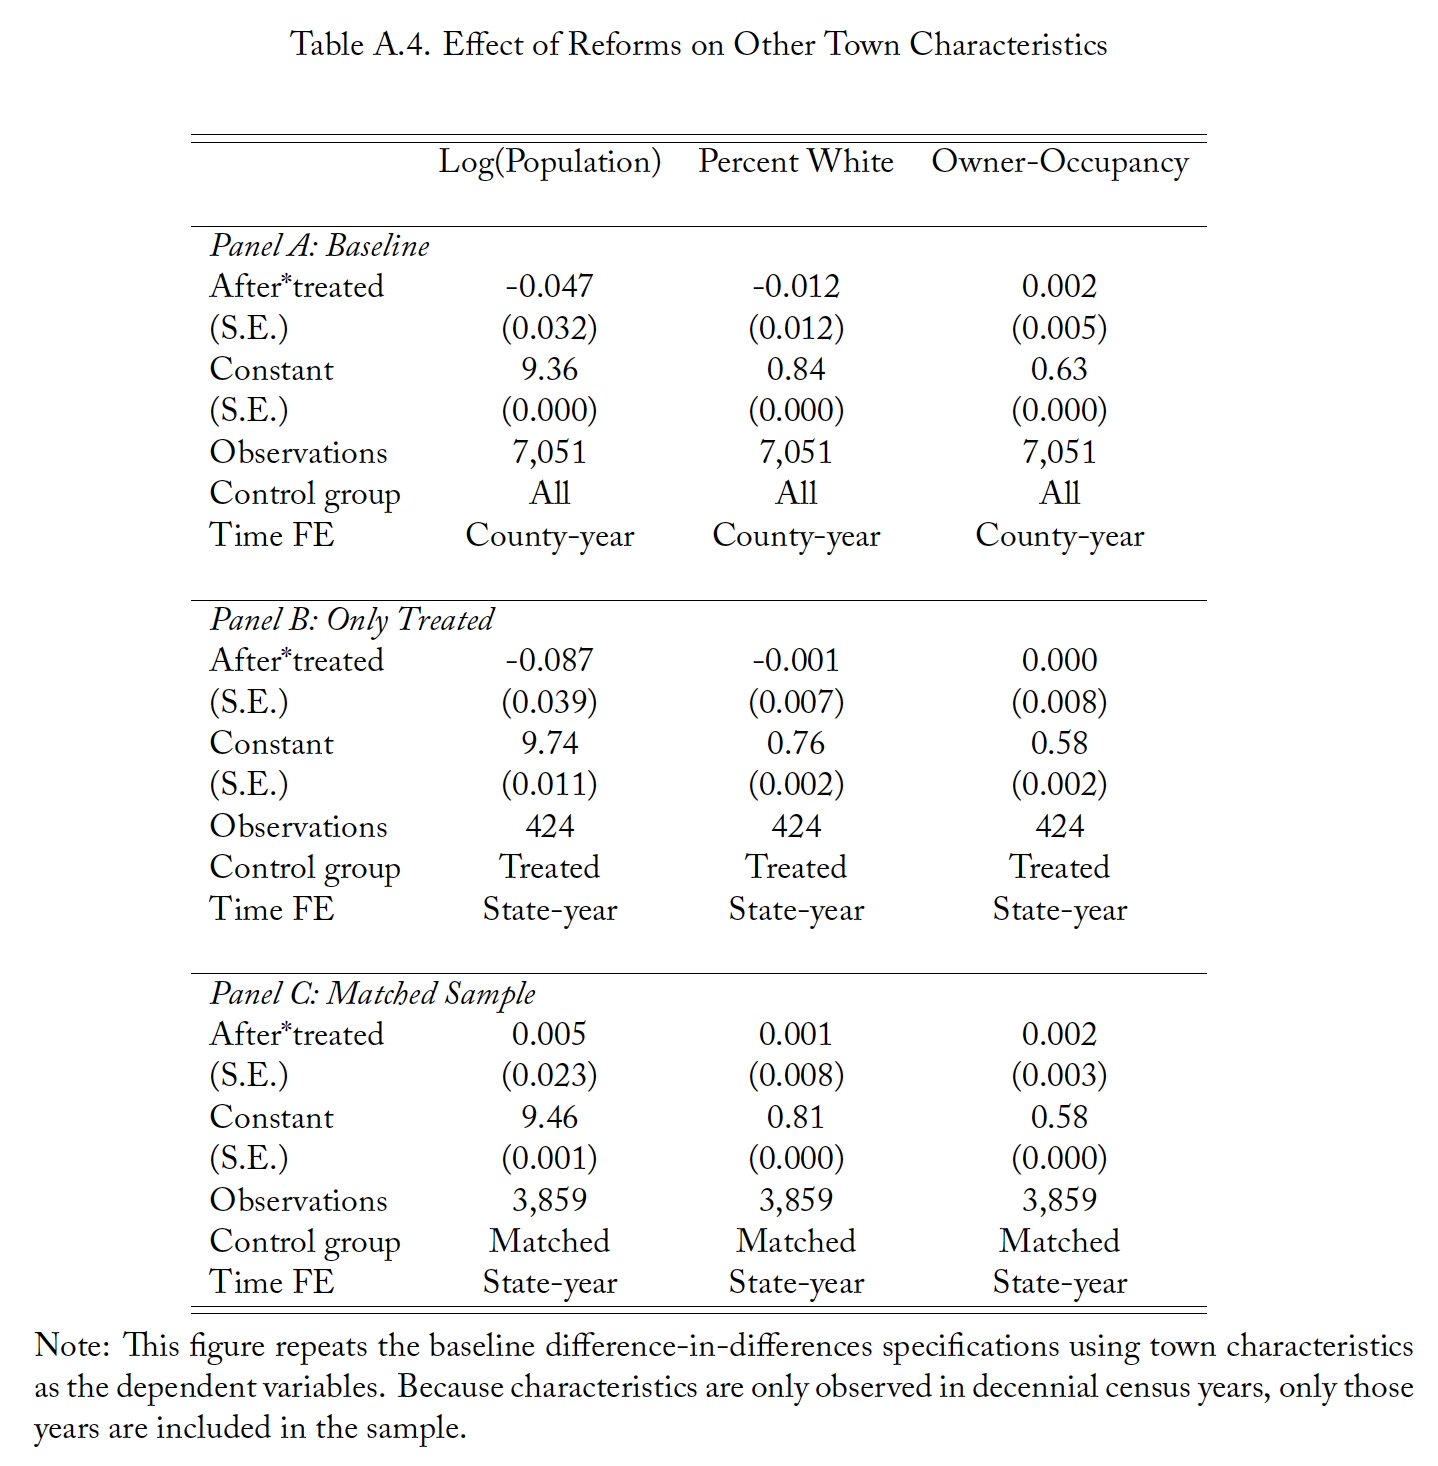 Table A.4. Effect of Reforms on Other Town Characteristics